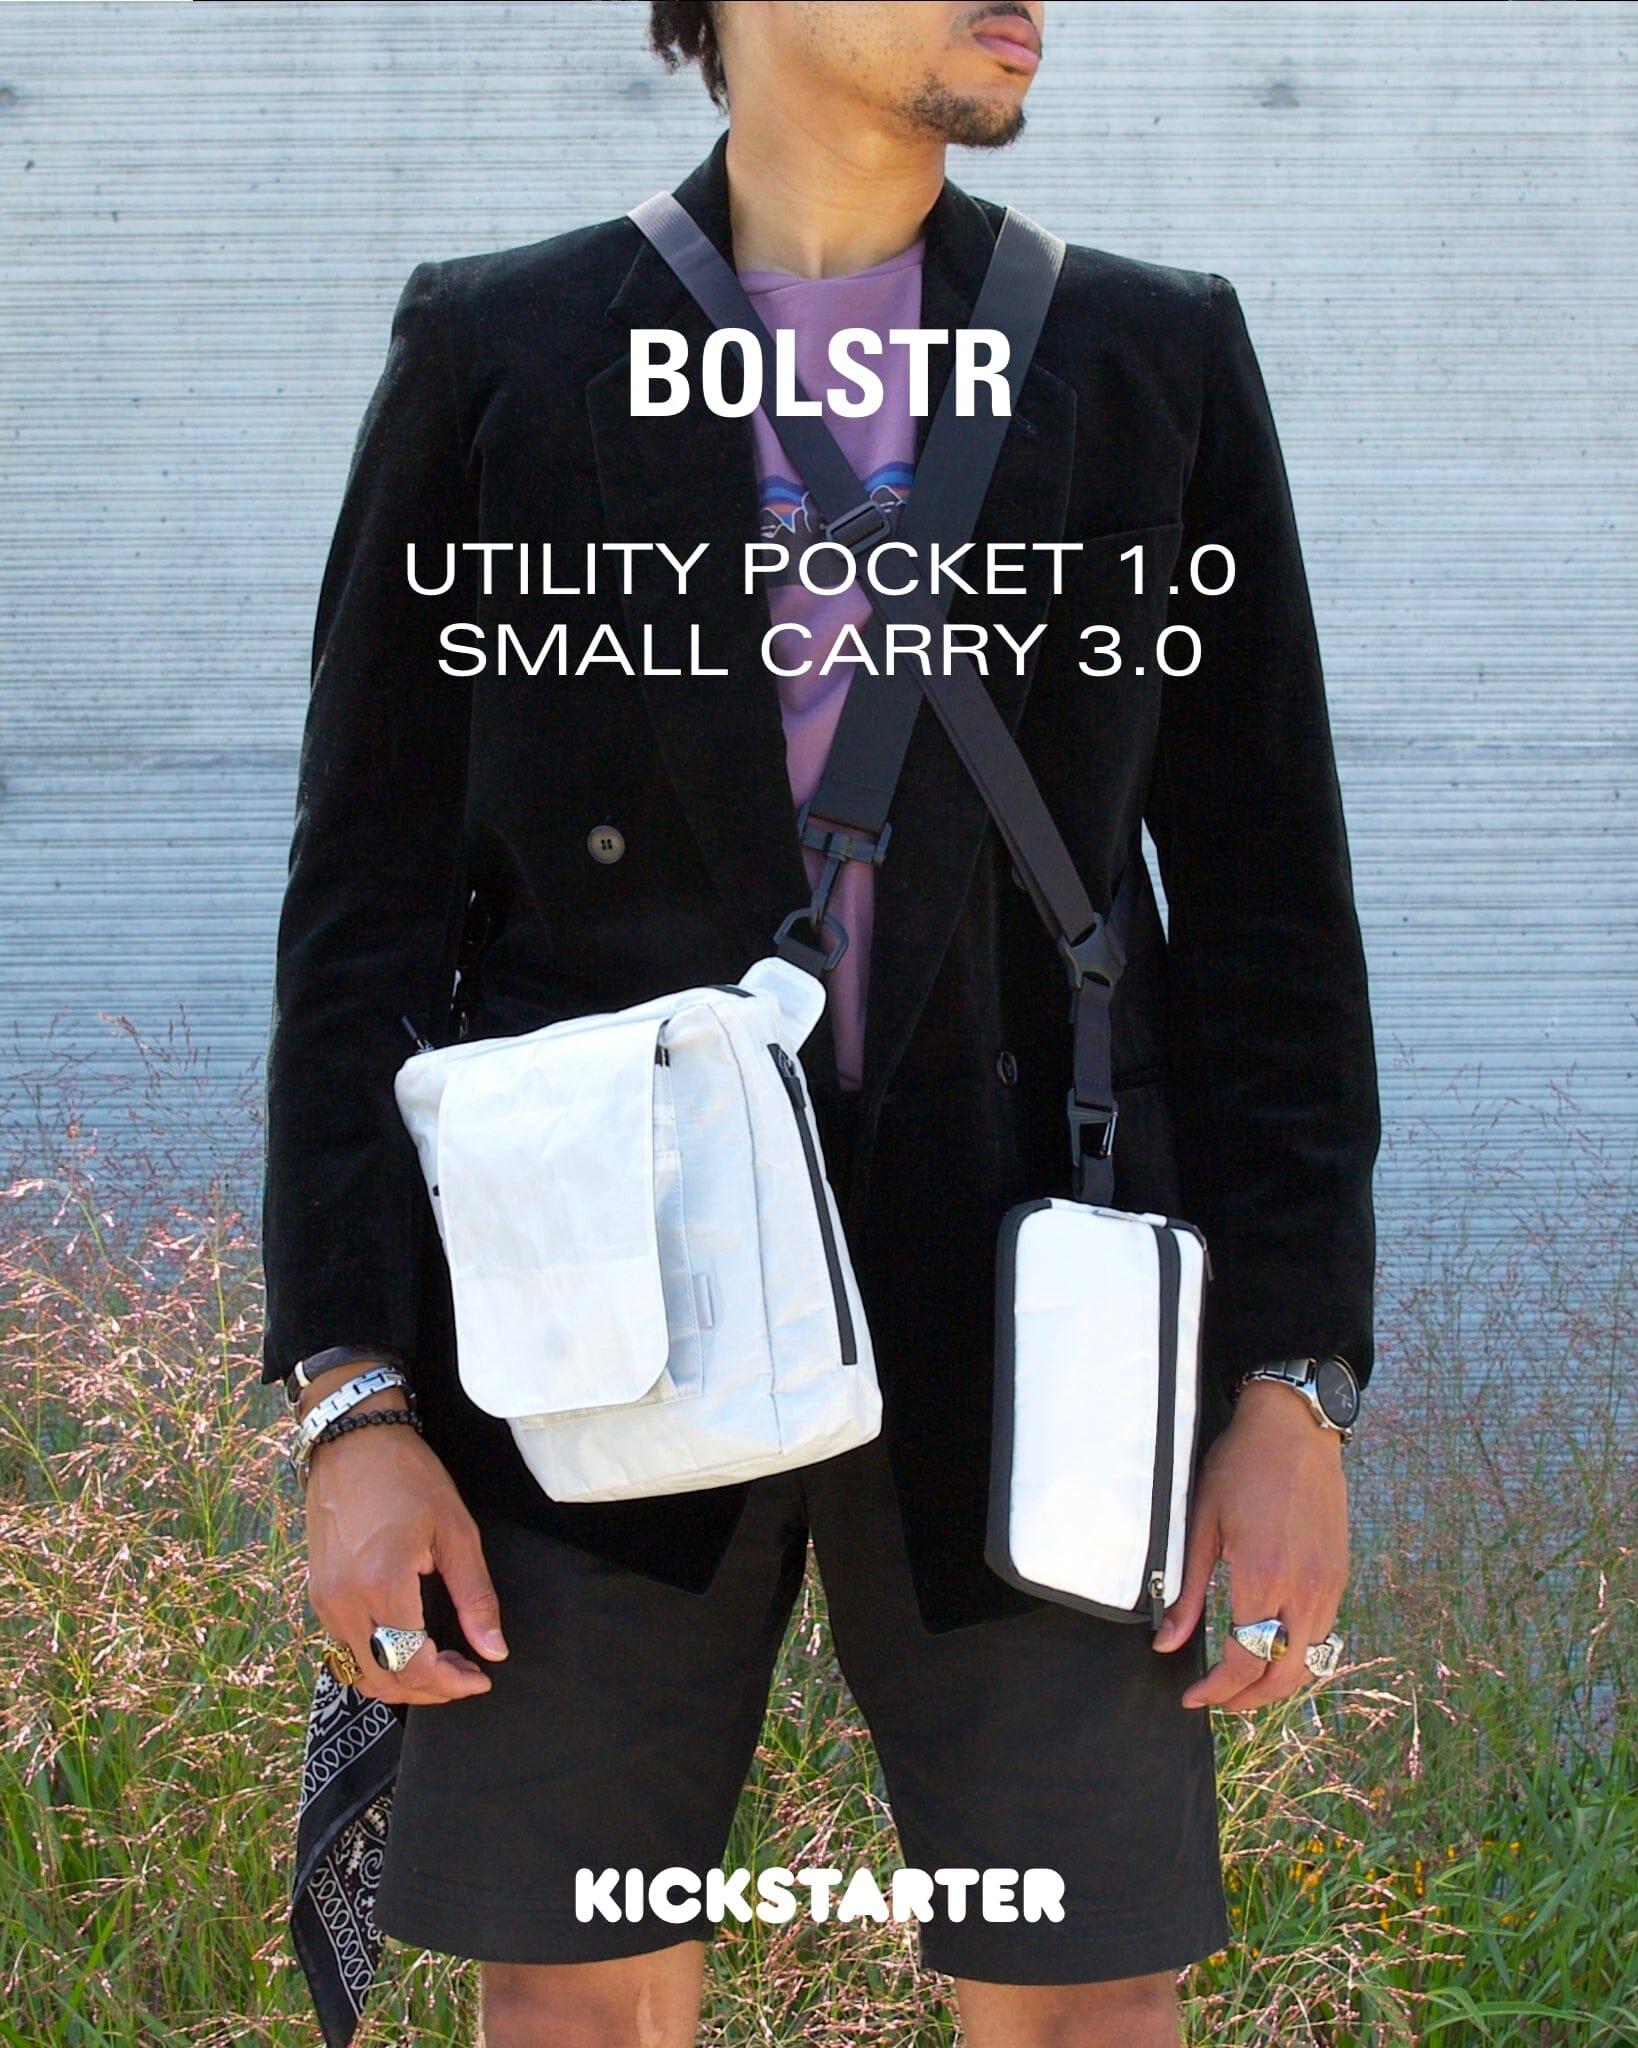 bolstr launches crowdfunding campaign for one-of-a-kind Utility Pocket in collaboration with Xhibition.